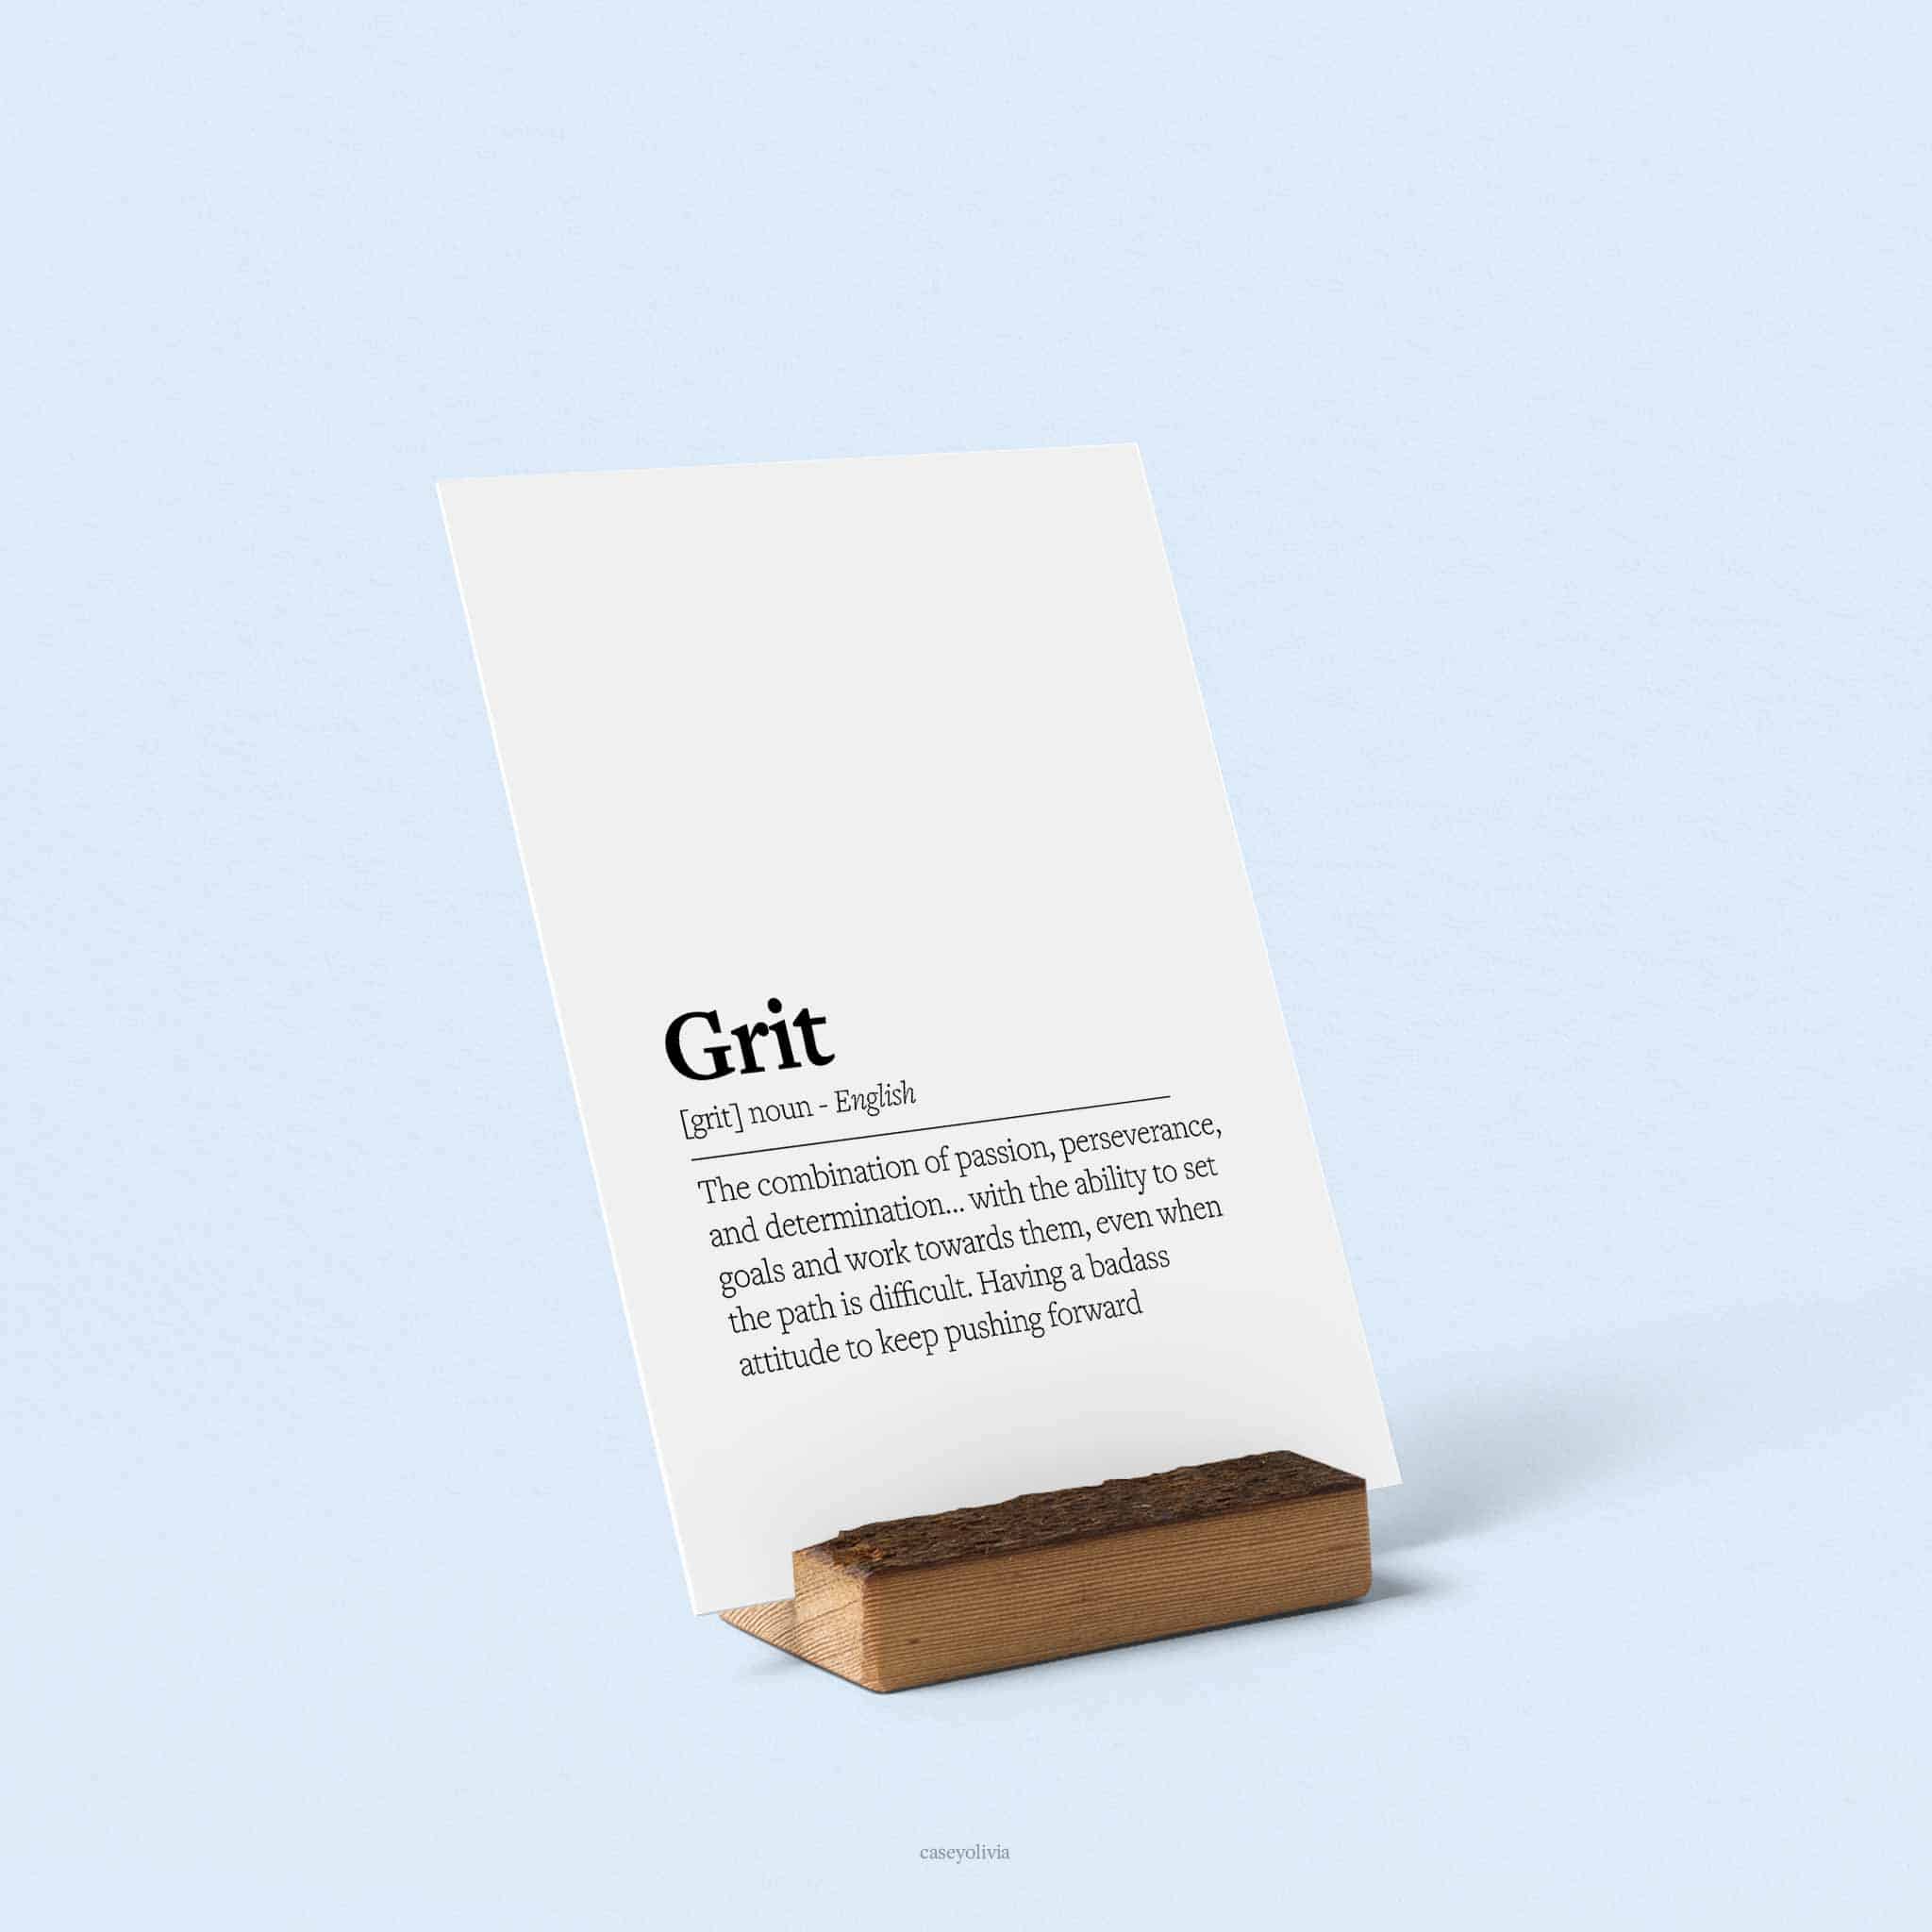 grit printable quote for home office or living room